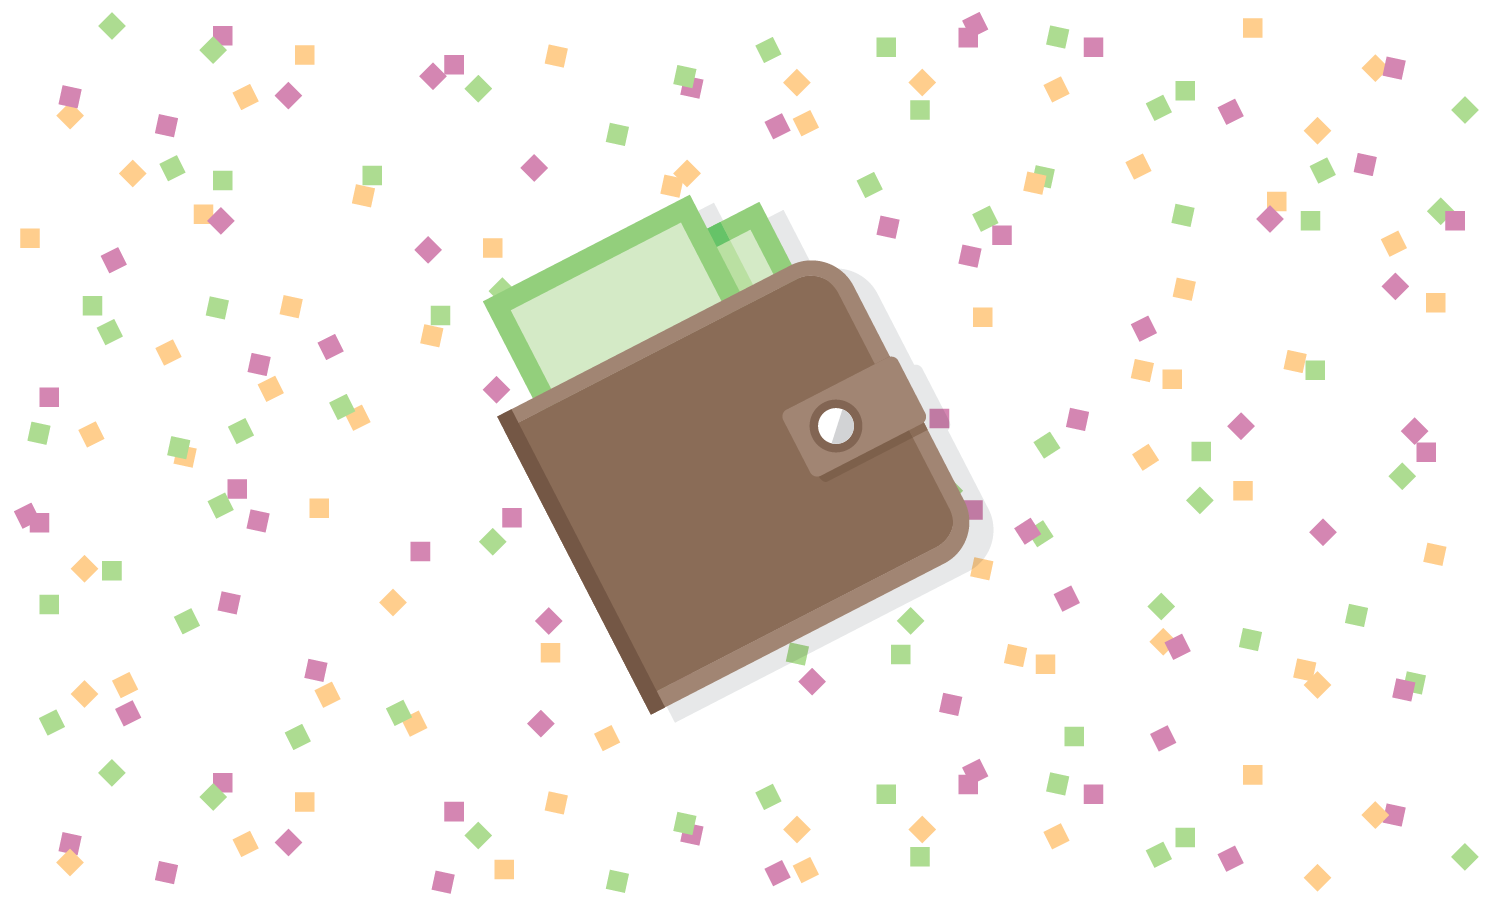 Wallet with New Year's confetti in background